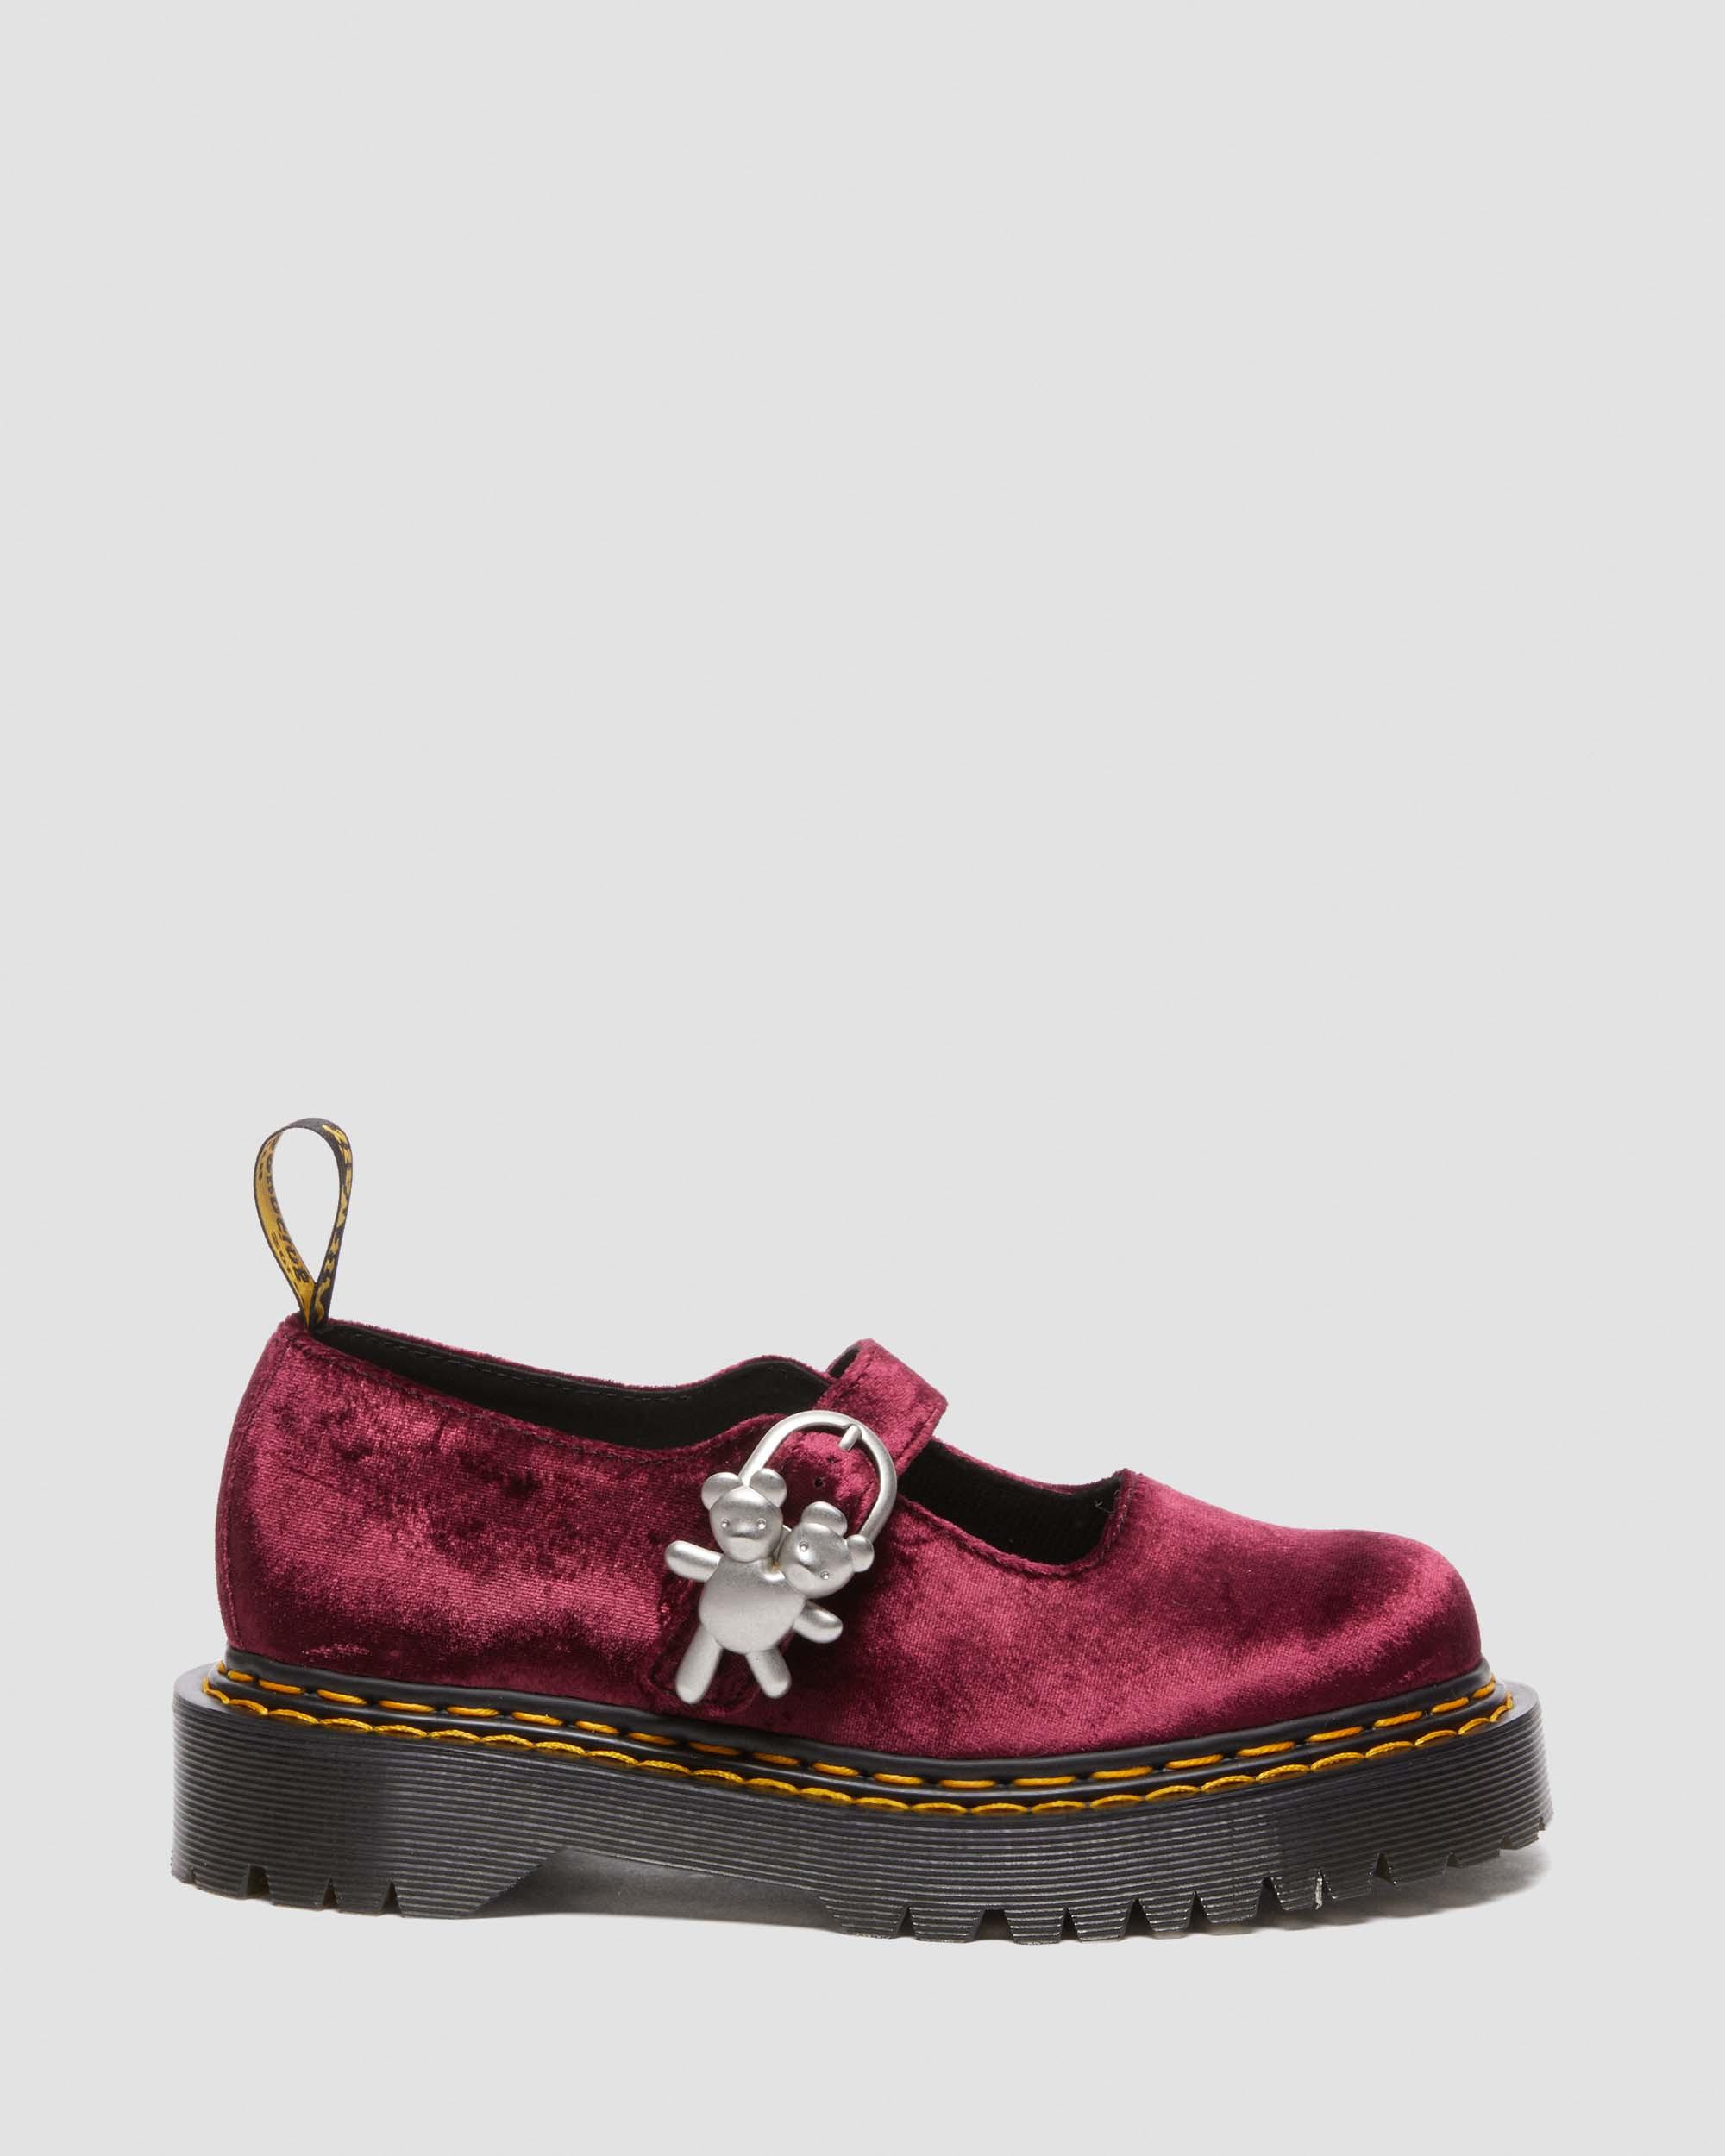 CHAUSSURES ADDINA BEX HEAVEN BY MARC JACOBS EN VELOURS in Rouge Cherry Red